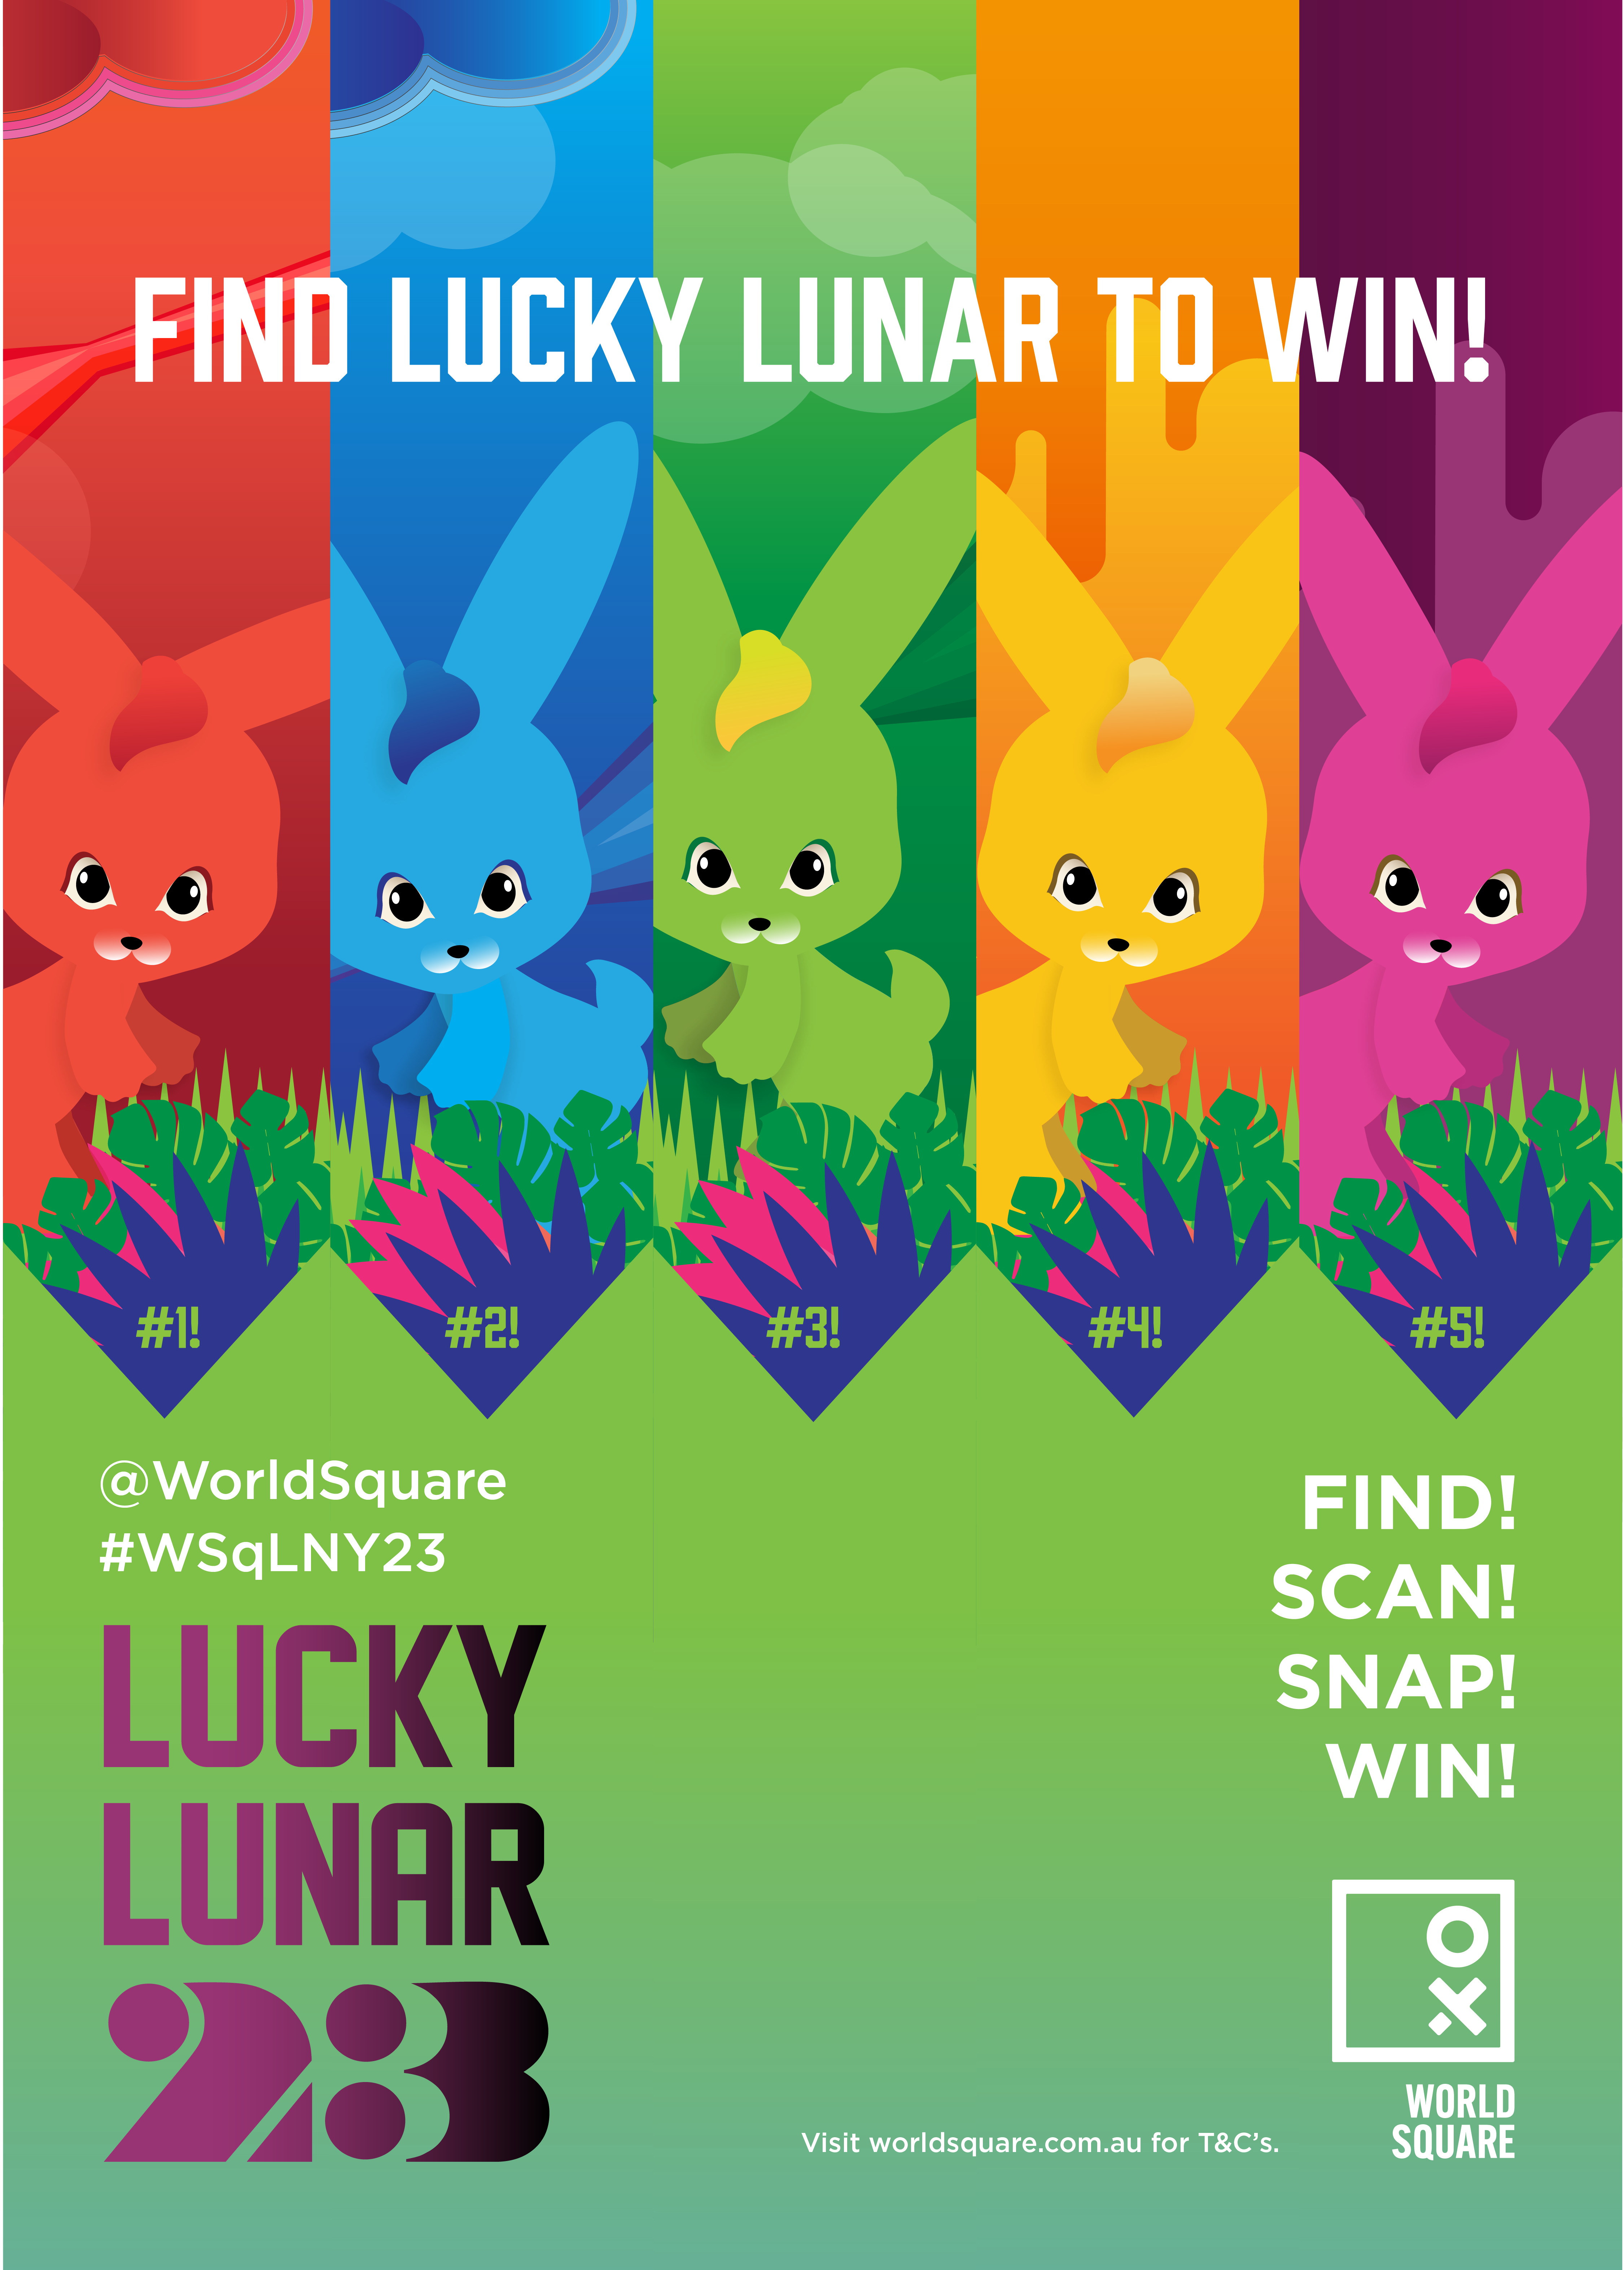 Digital art depicting 5 rabbits to promote the Lucky Lunar Lunar New Year experiential brand activation for World Square Sydney